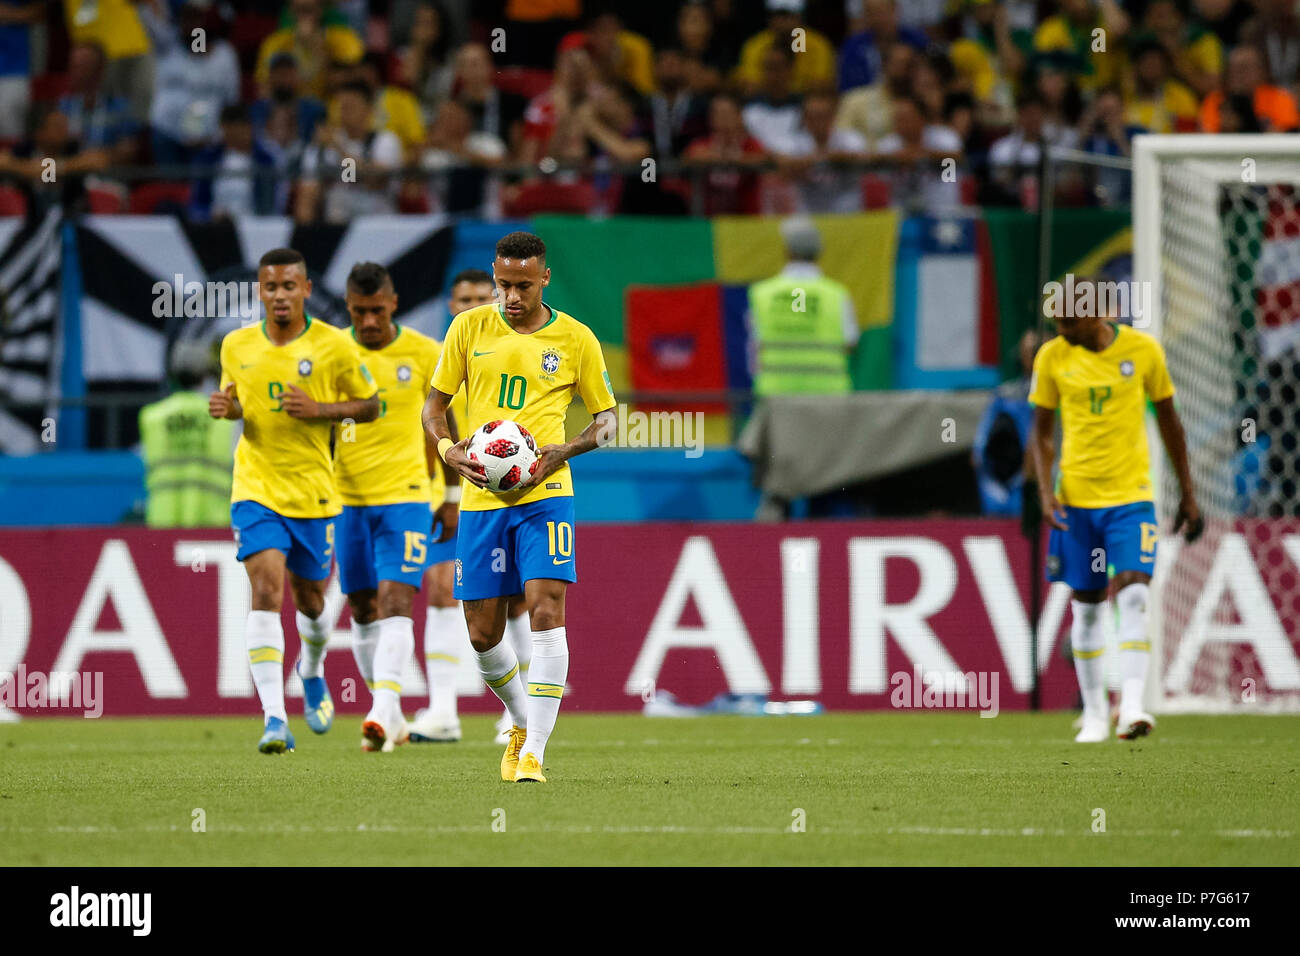 Kazan, Russia. 6th July 2018. Neymar of Brazil looks dejected after his side concede their first goal to make the score 1-0 during the 2018 FIFA World Cup Quarter Final match between Brazil and Belgium at Kazan Arena on July 6th 2018 in Kazan, Russia. Credit: PHC Images/Alamy Live News Stock Photo